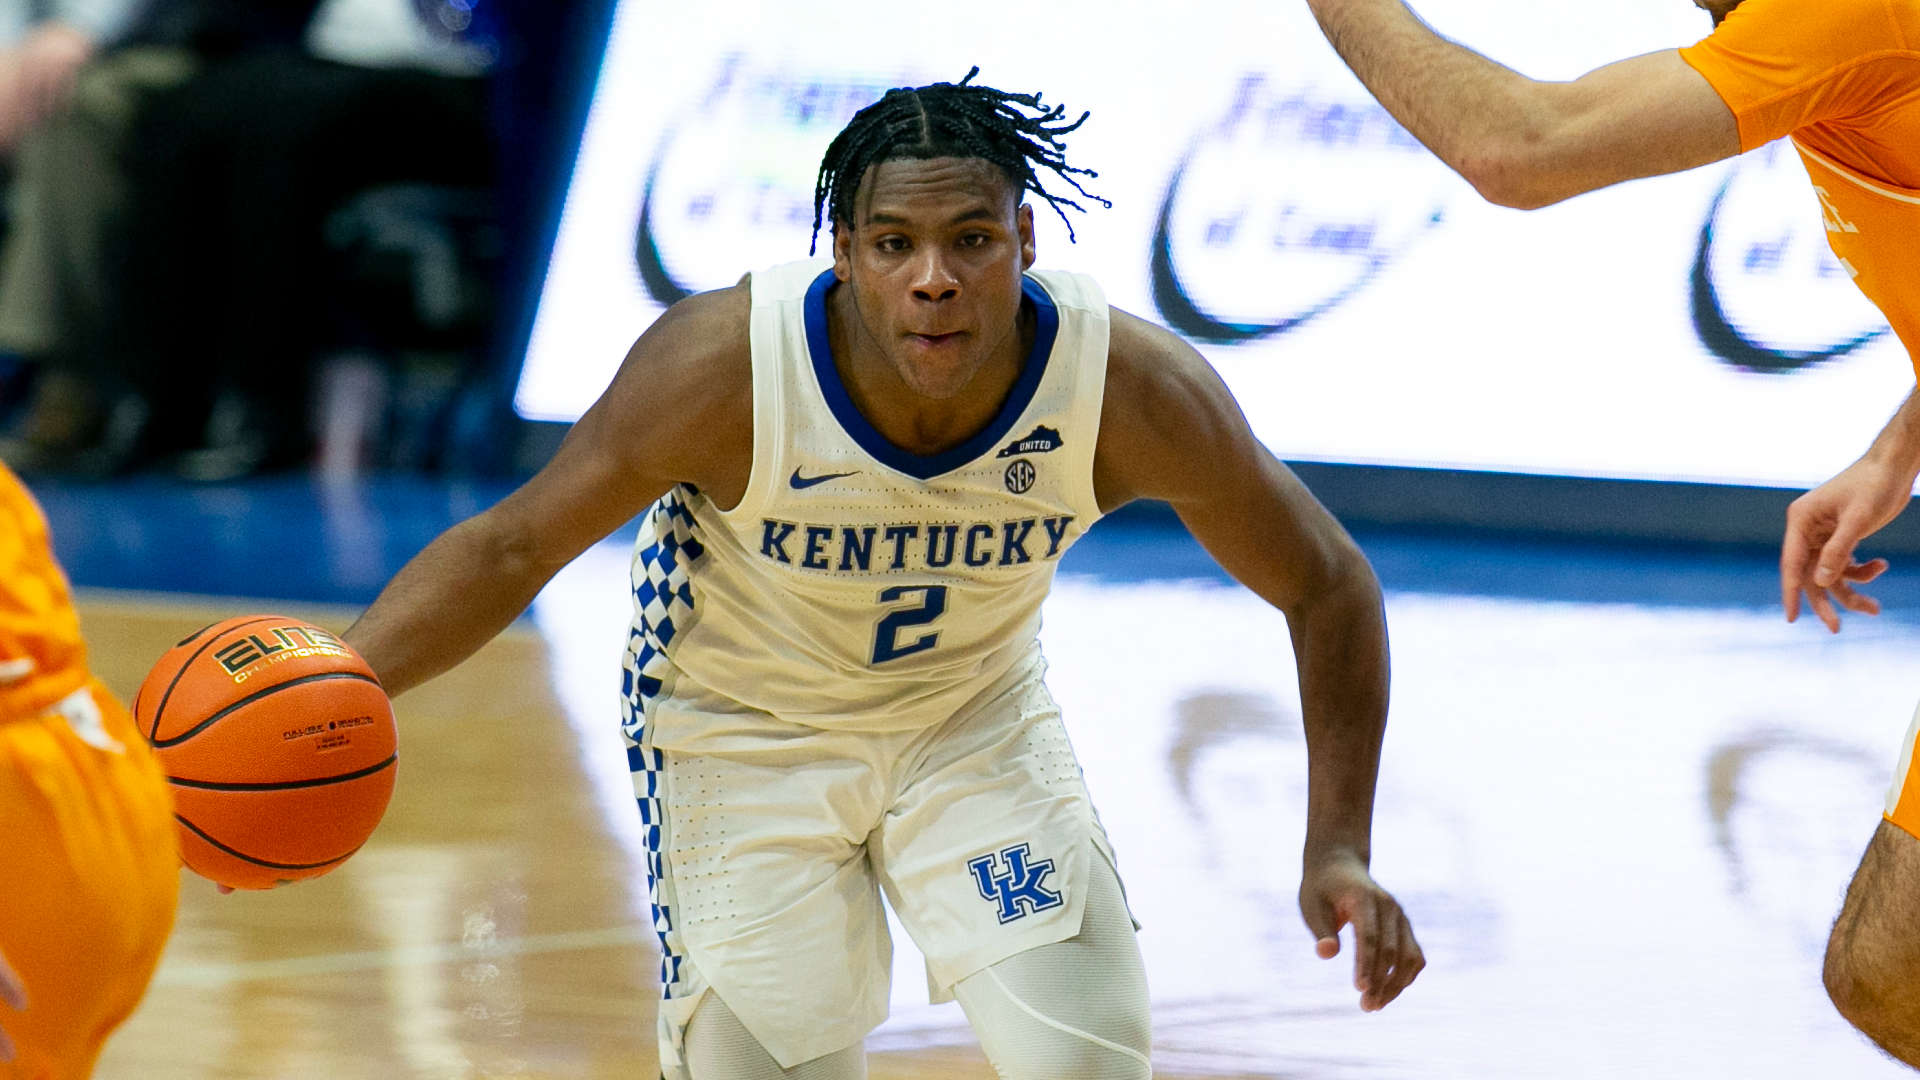 UK Men’s Basketball Conference Opponents Announced for 2022-23